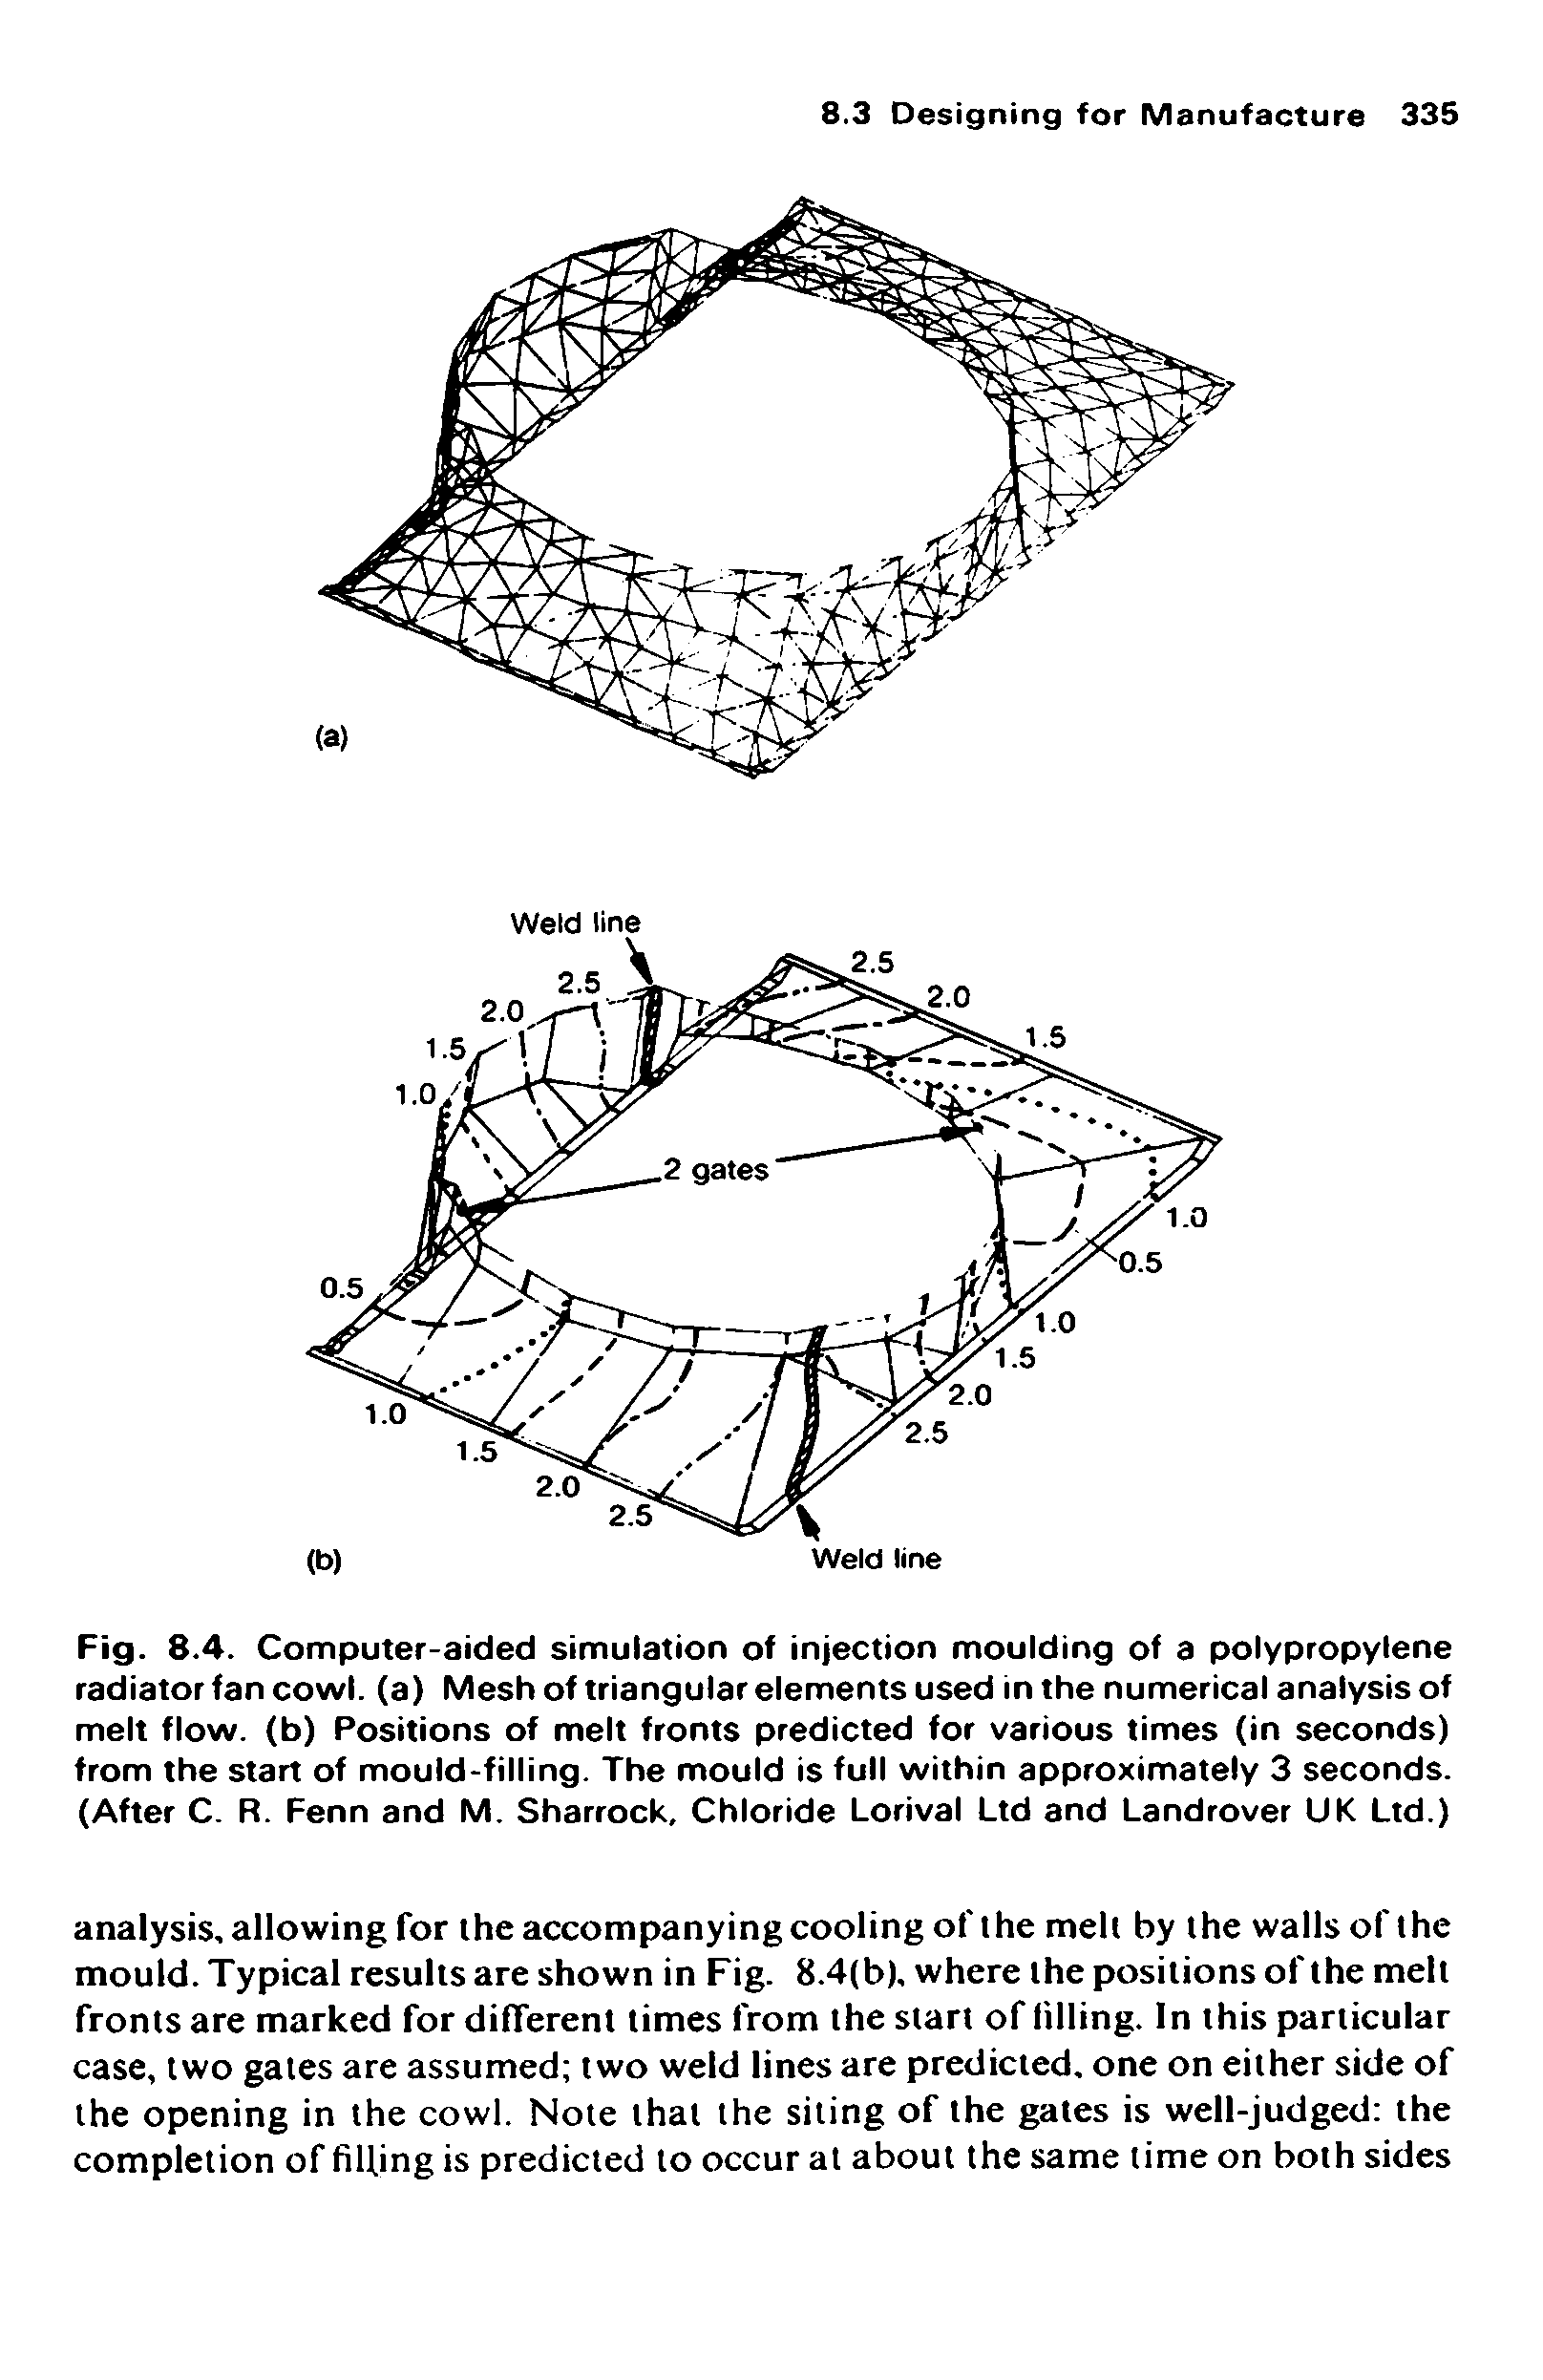 Fig. 8.4. Computer-aided simulation of injection moulding of a polypropylene radiator fan cowl, (a) Mesh of triangular elements used in the numerical analysis of melt flow, (b) Positions of melt fronts predicted for various times (in seconds) from the start of mould-filling. The mould is full within approximately 3 seconds. (After C. R. Fenn and M. Sharrock, Chloride Lorival Ltd and Landrover UK Ltd.)...